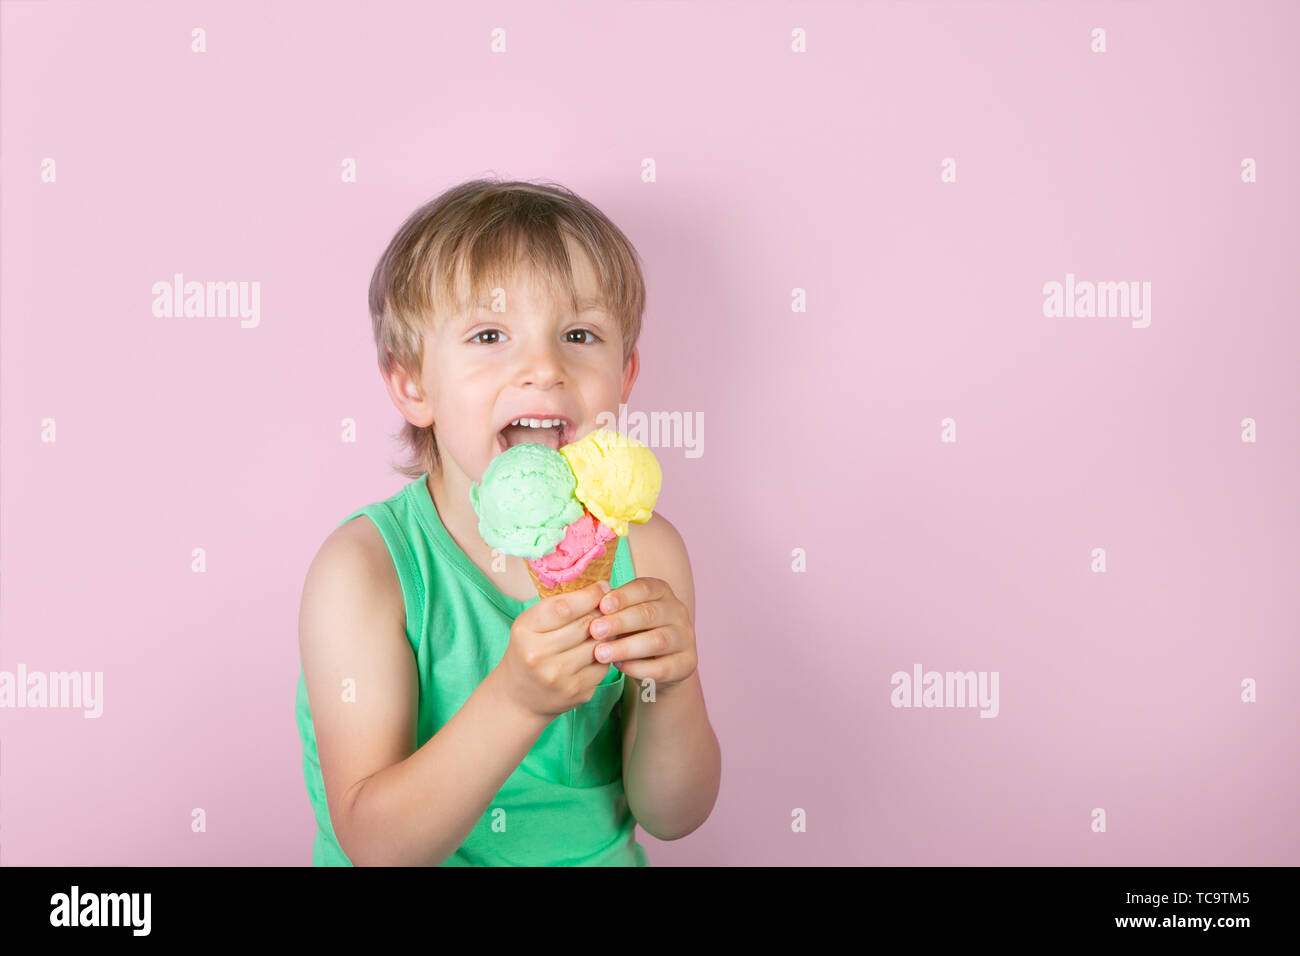 Happy boy eating ice cream in front of pink background Stock Photo